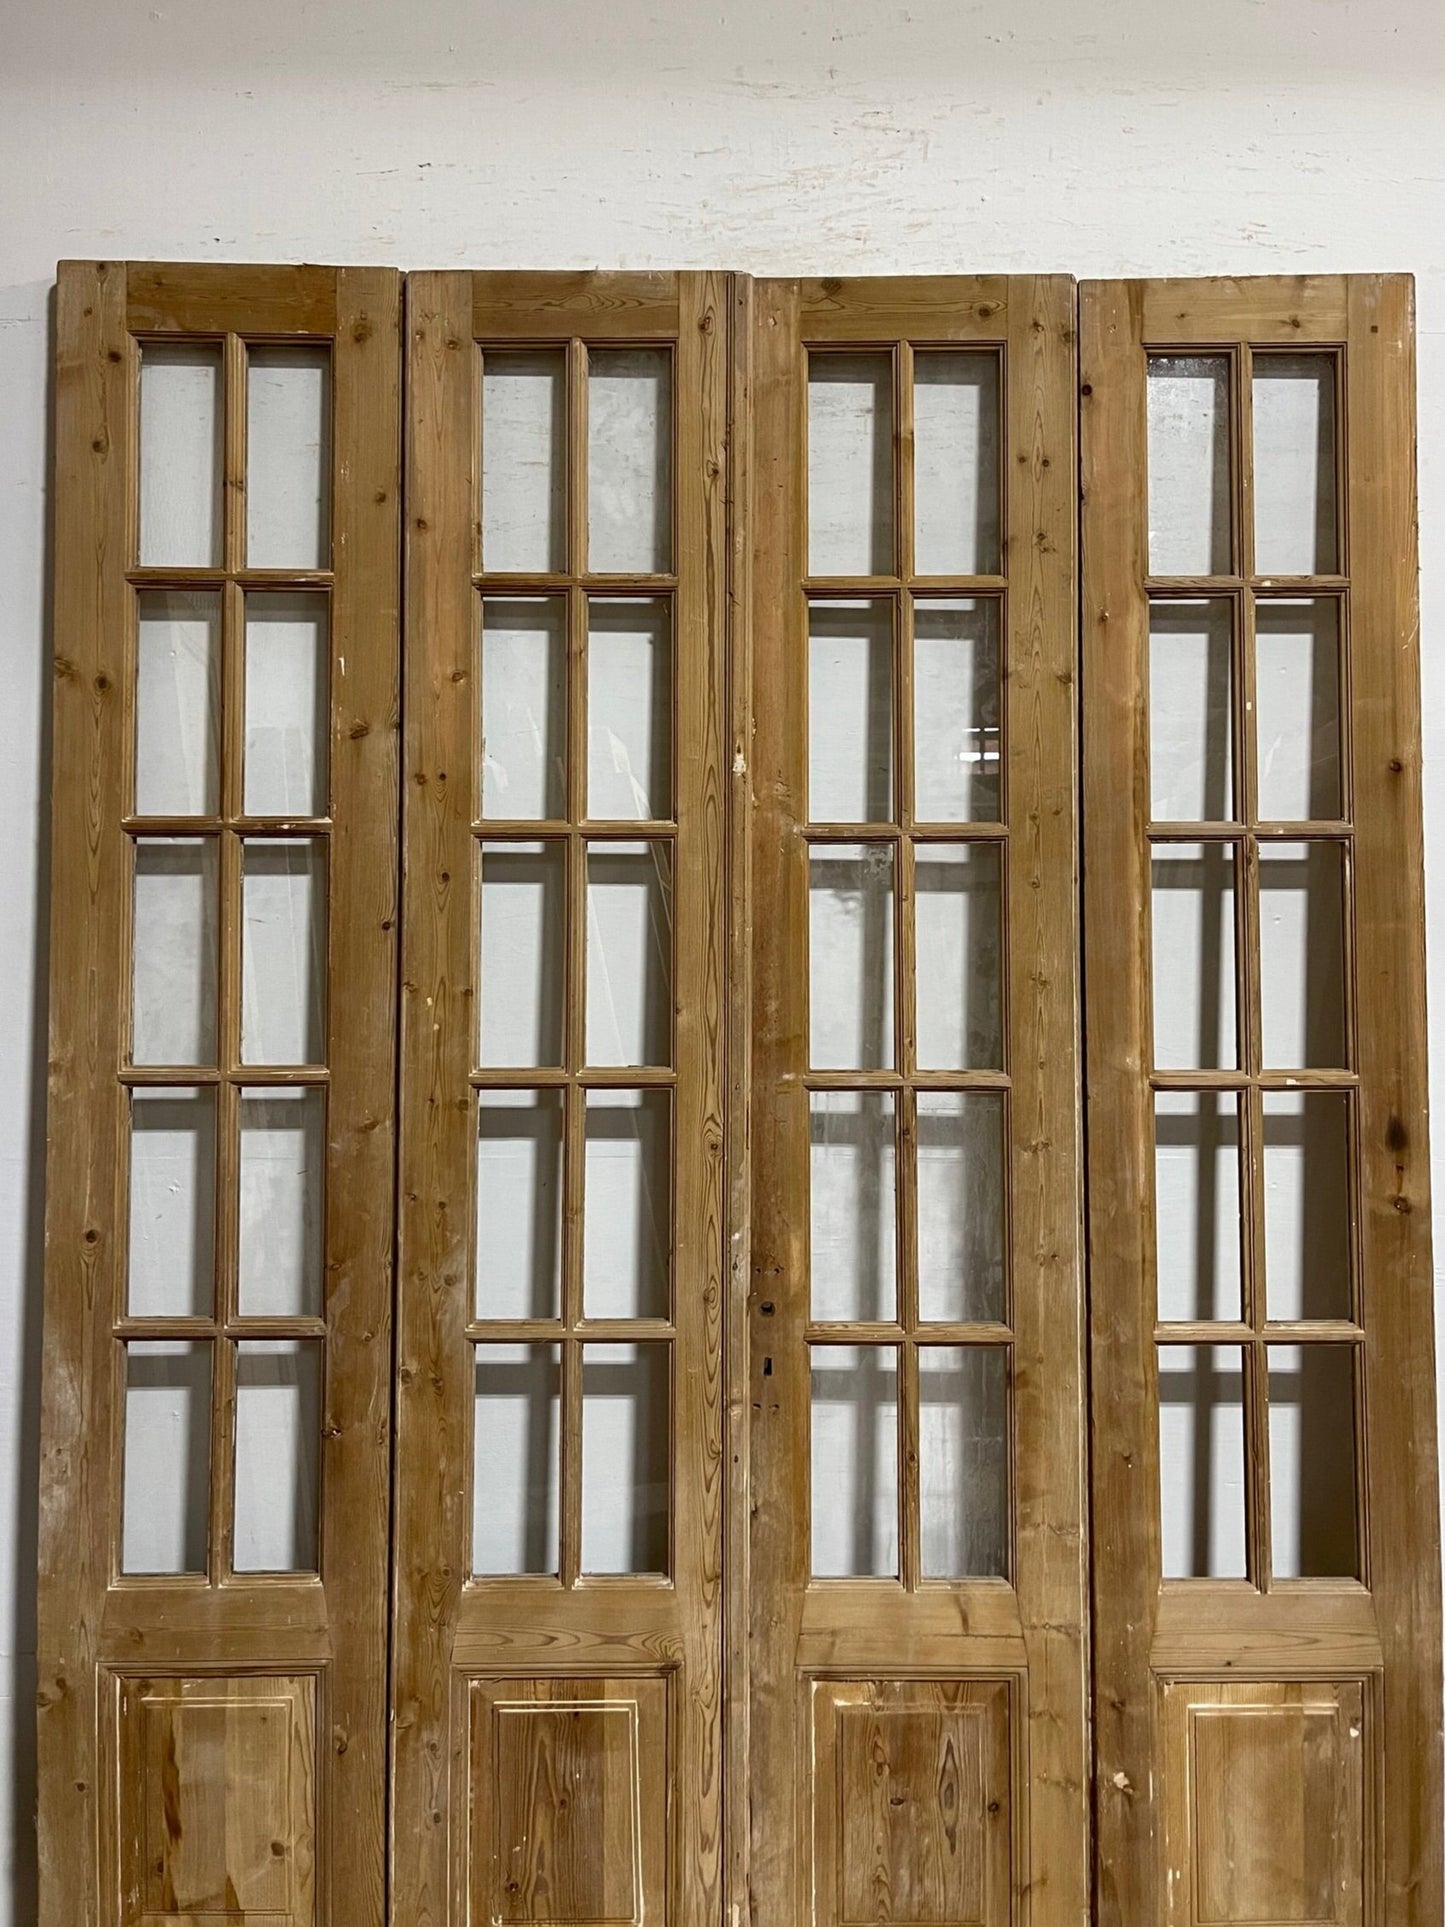 Antique french panel doors with glass (88 x 96.25) I064